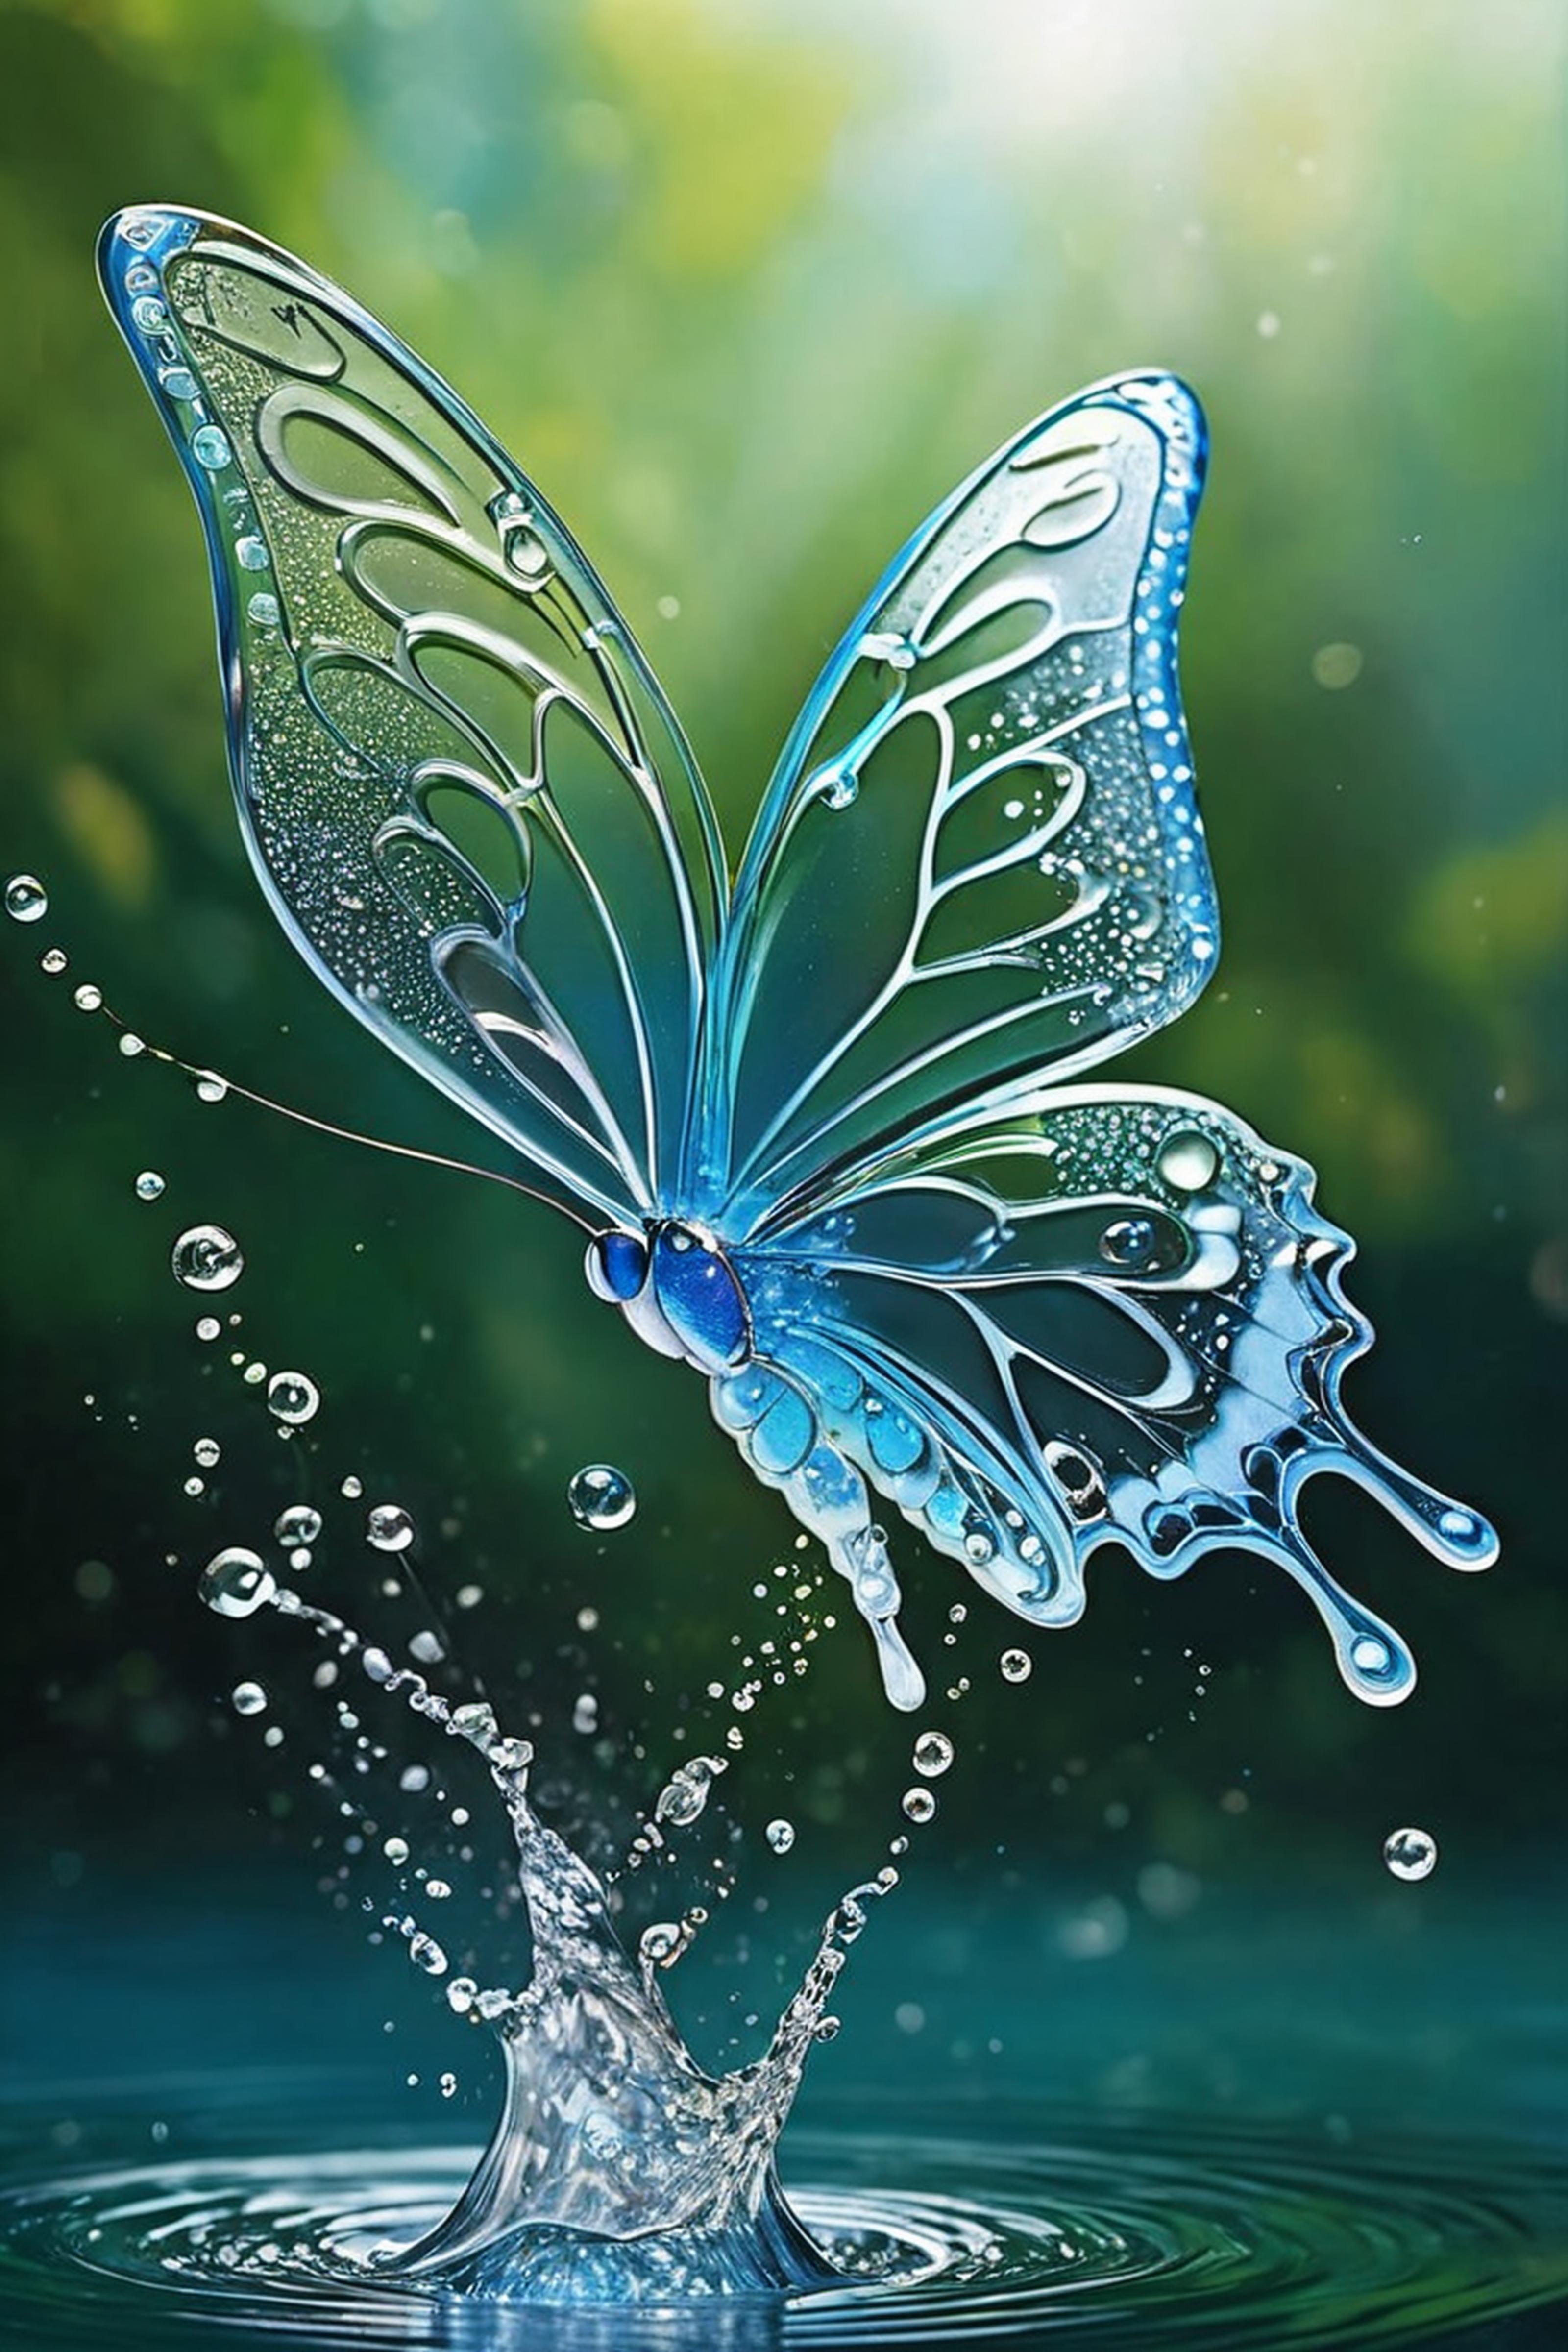 A beautiful blue butterfly is flying through water droplets, creating a mesmerizing scene.